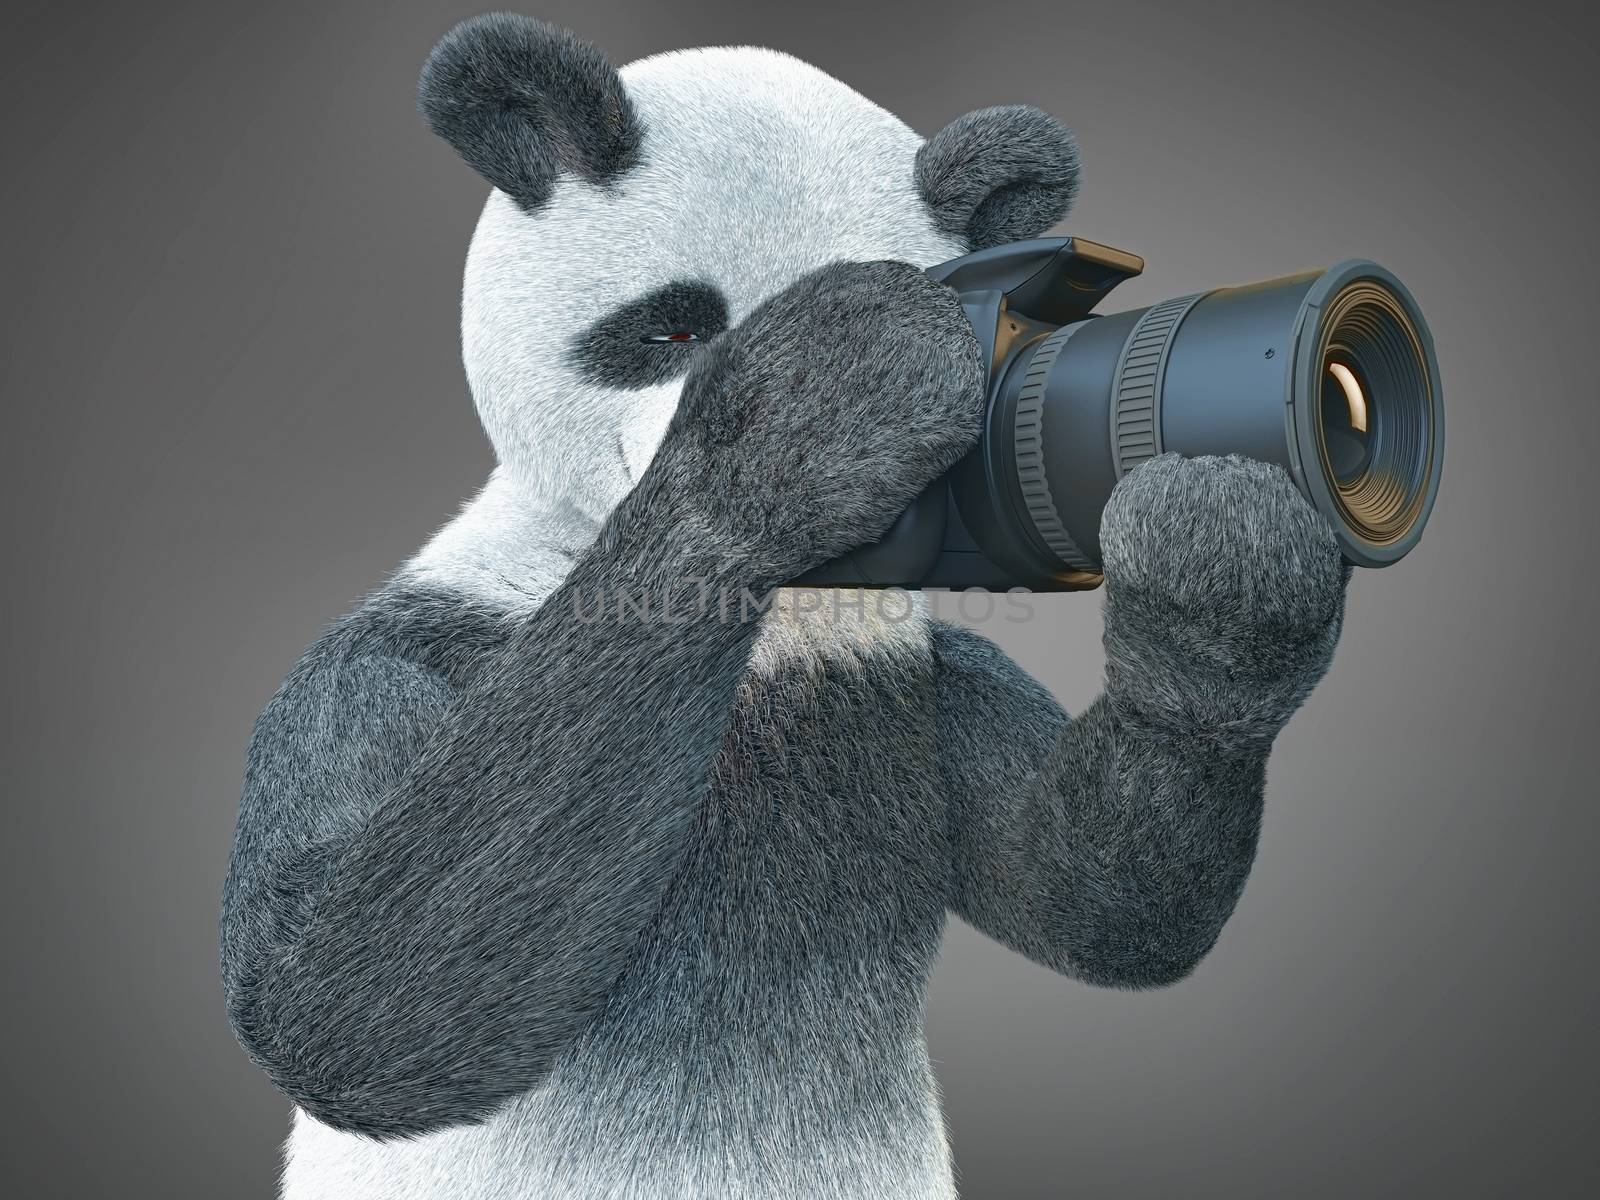 panda animail character photographer camera takes picture isolated background 3d cg render digital illustration by xtate